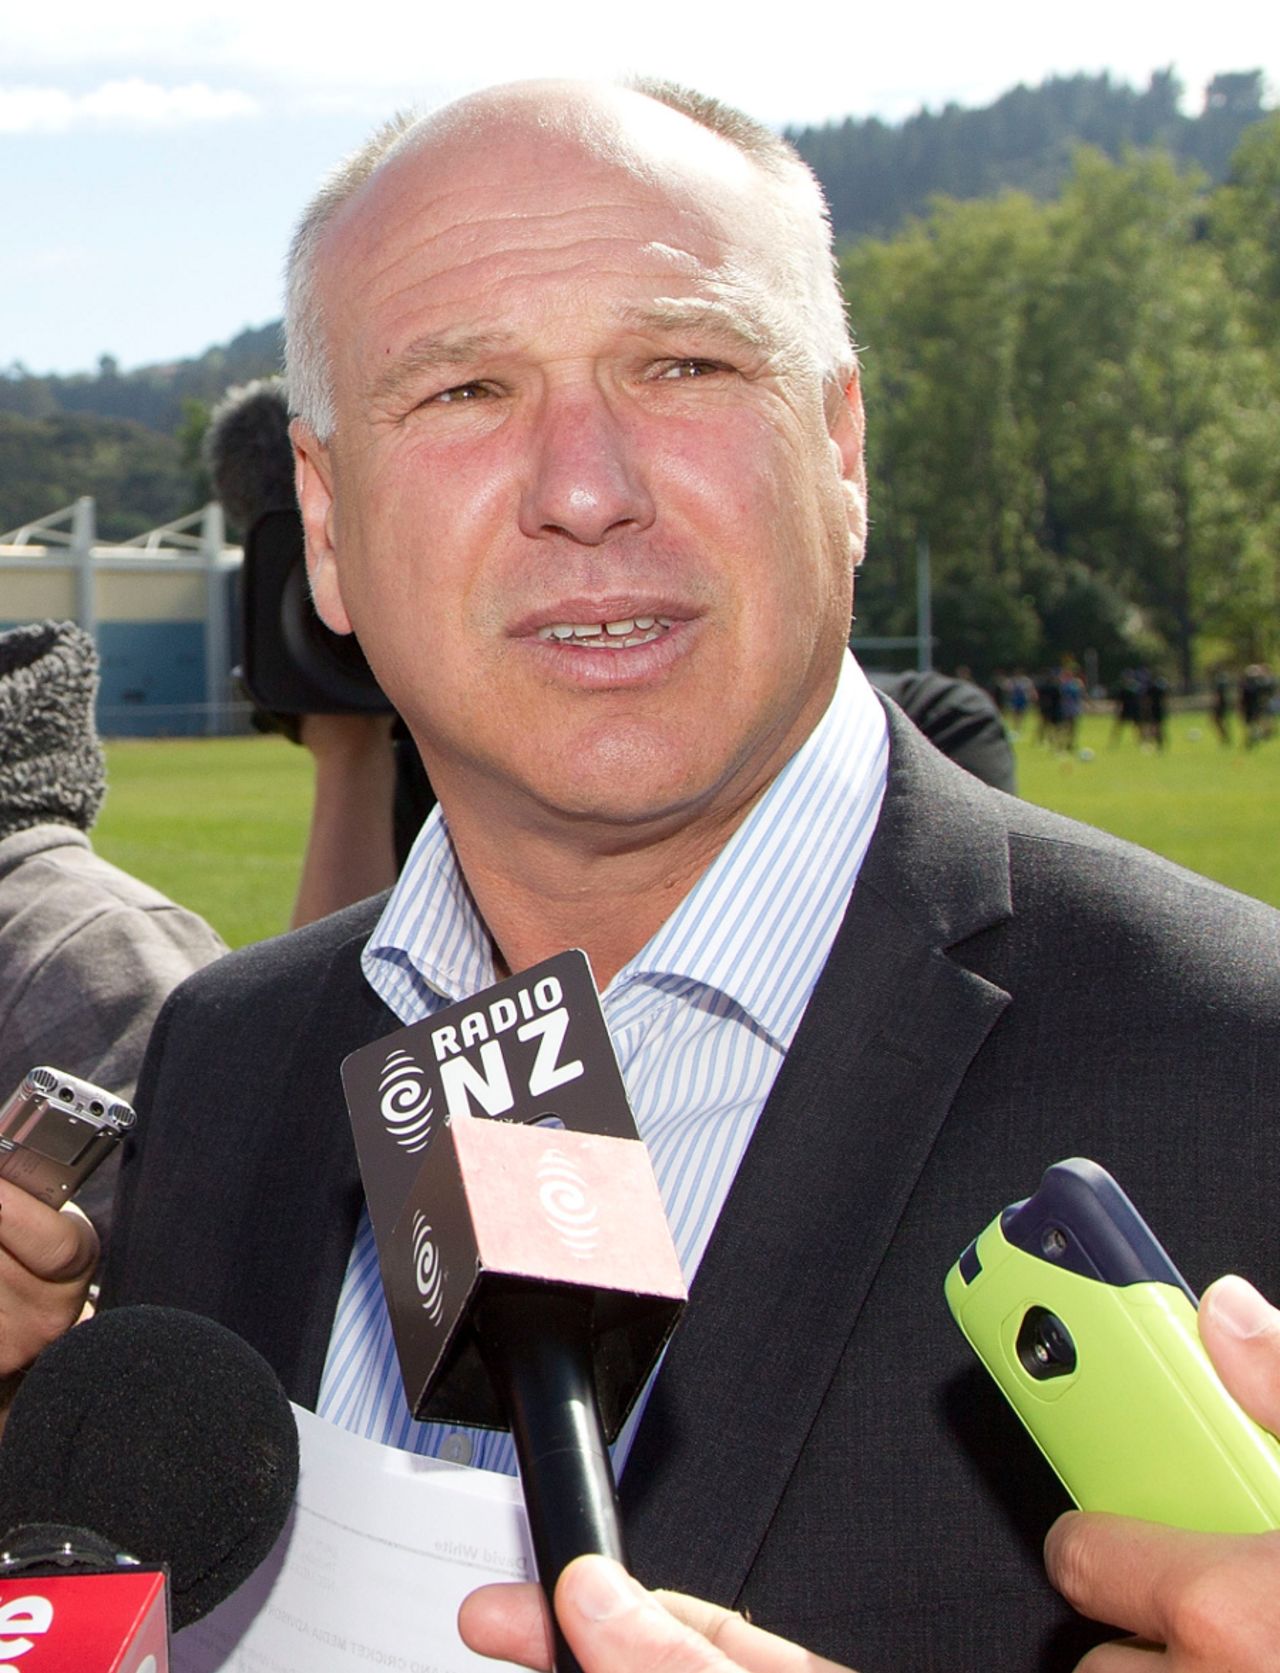 David White said he was 'shocked and surprised', New Zealand v West Indies, 1st Test, Dunedin, 3rd day, December 5, 2013